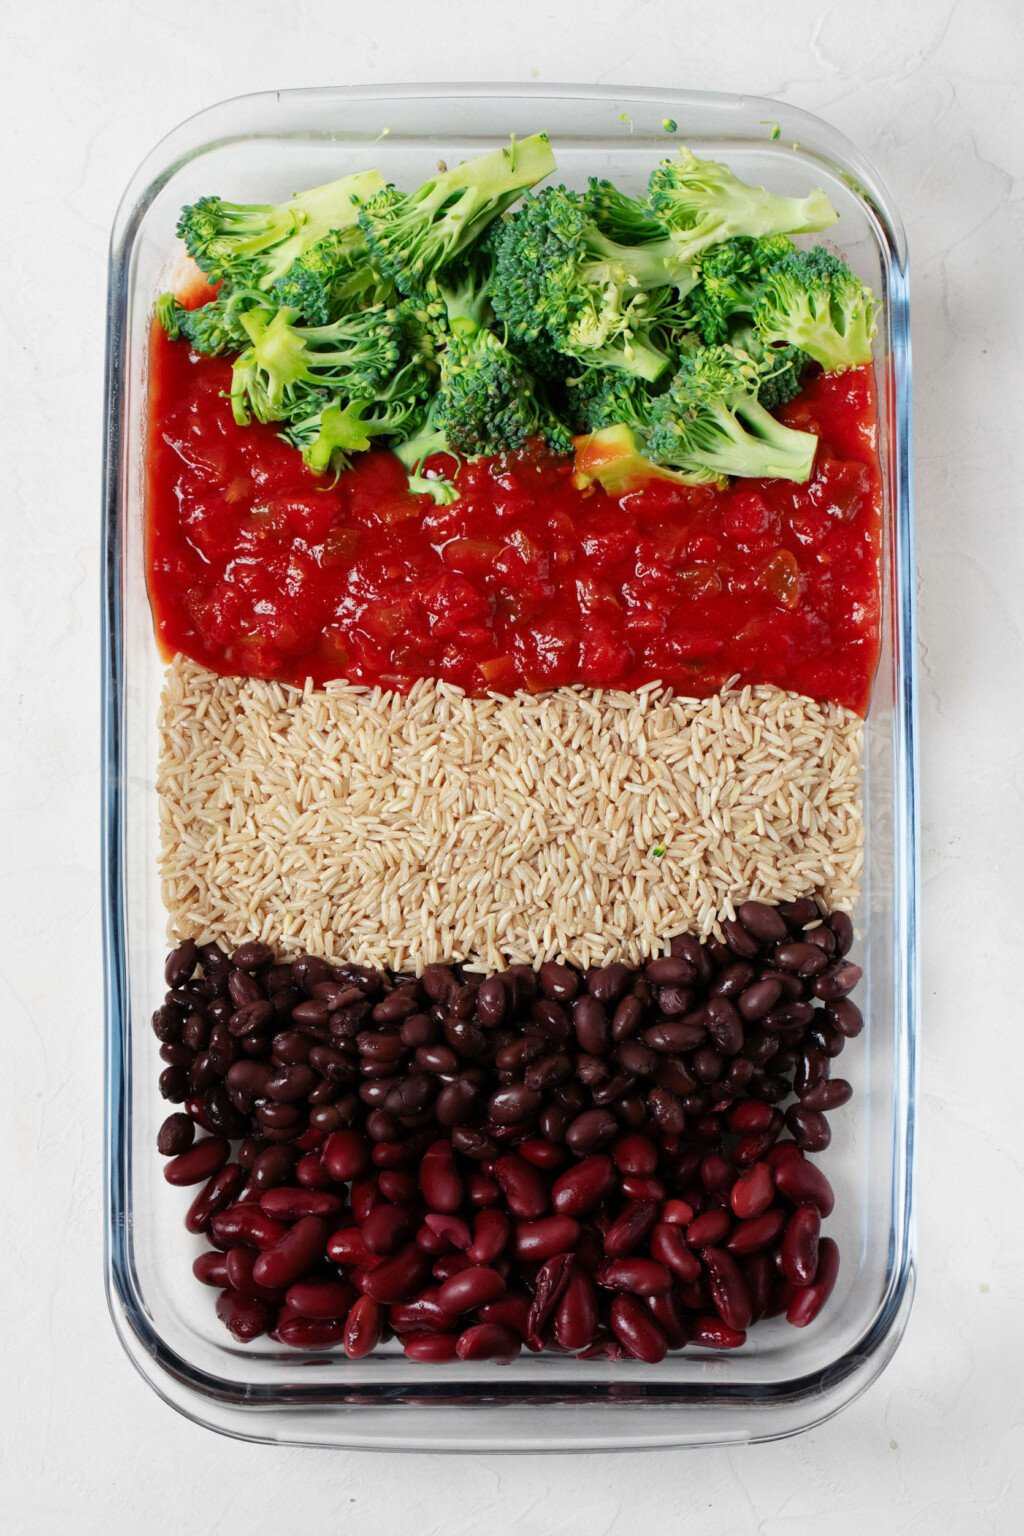 An overhead image of a casserole dish, which is filled with rice, beans, salsa, and broccoli.